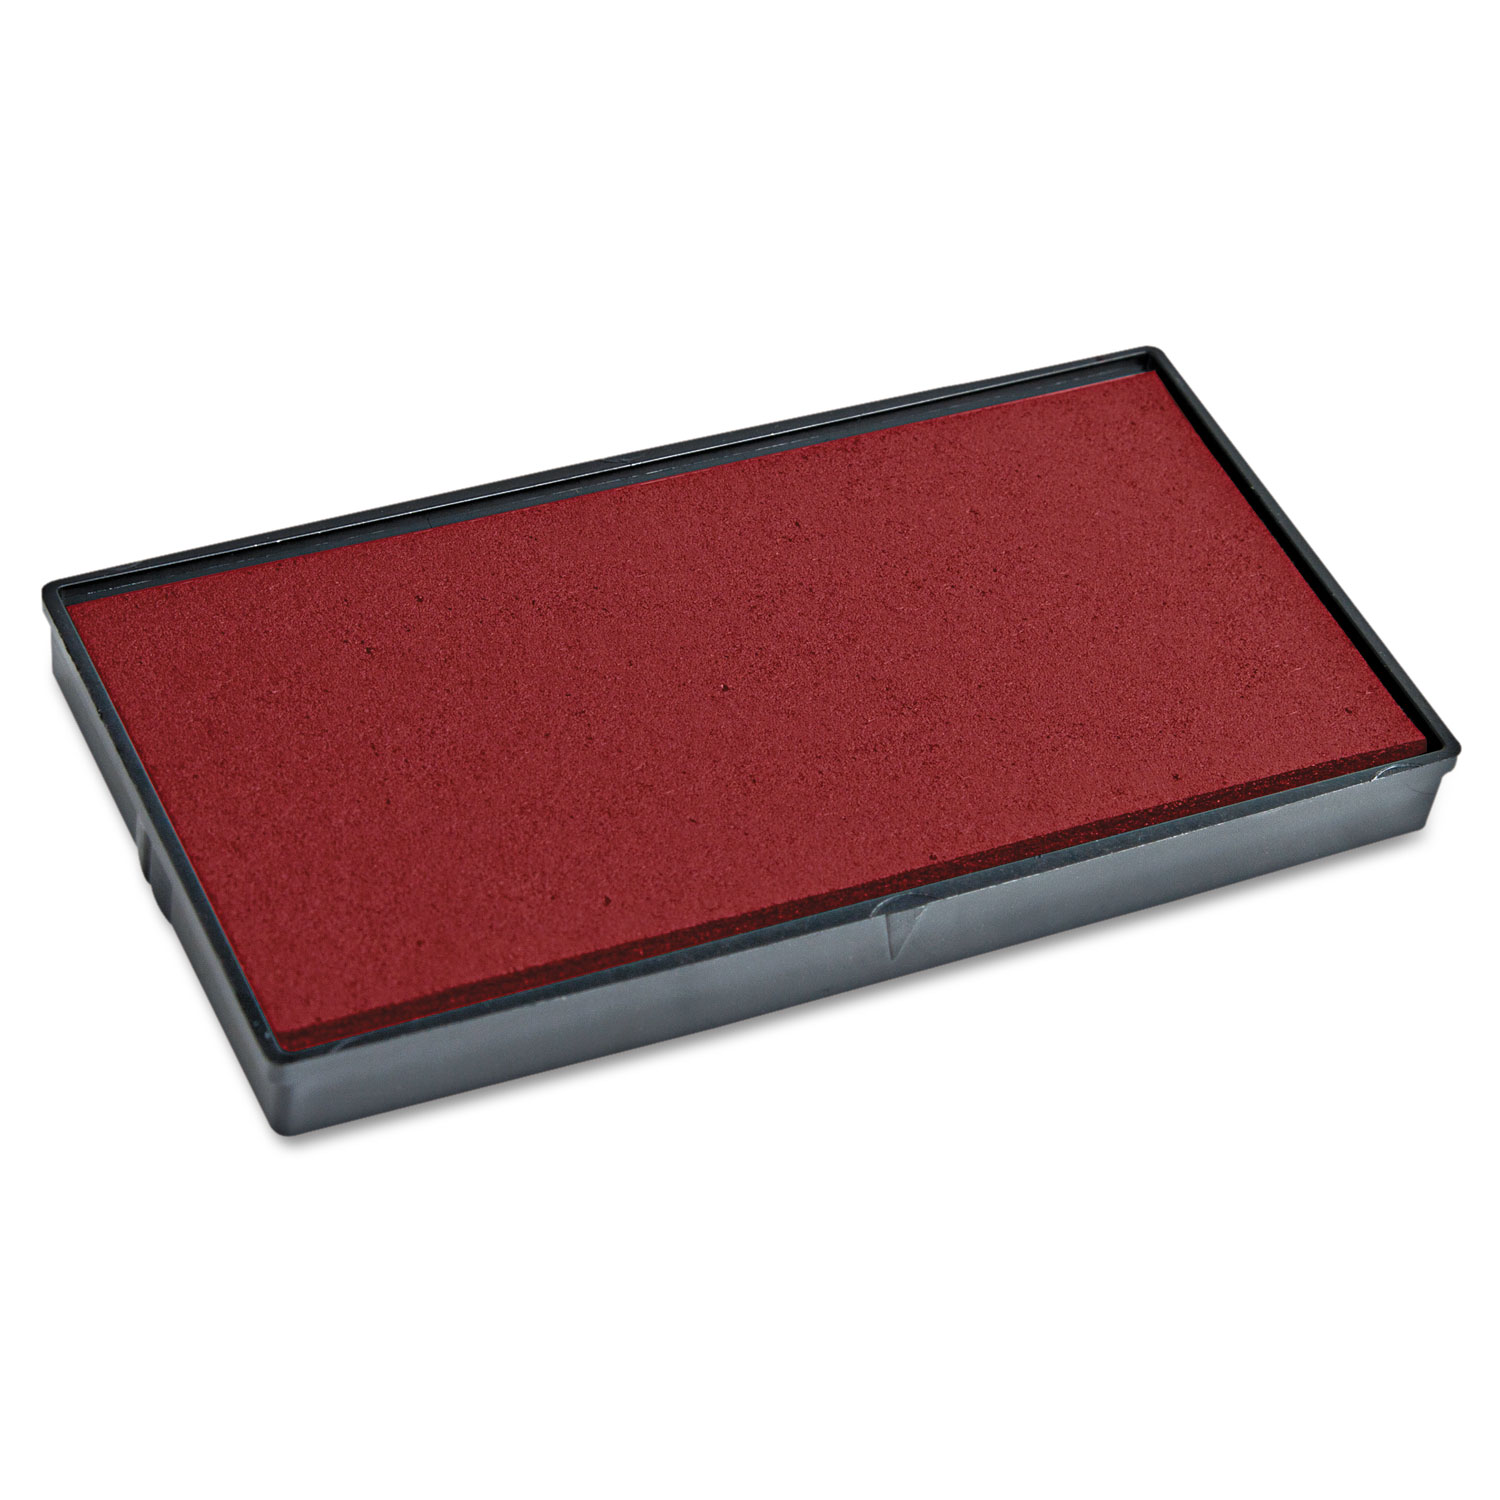  COSCO 2000PLUS 065470 Replacement Ink Pad for 2000PLUS 1SI30PGL, Red (COS065470) 